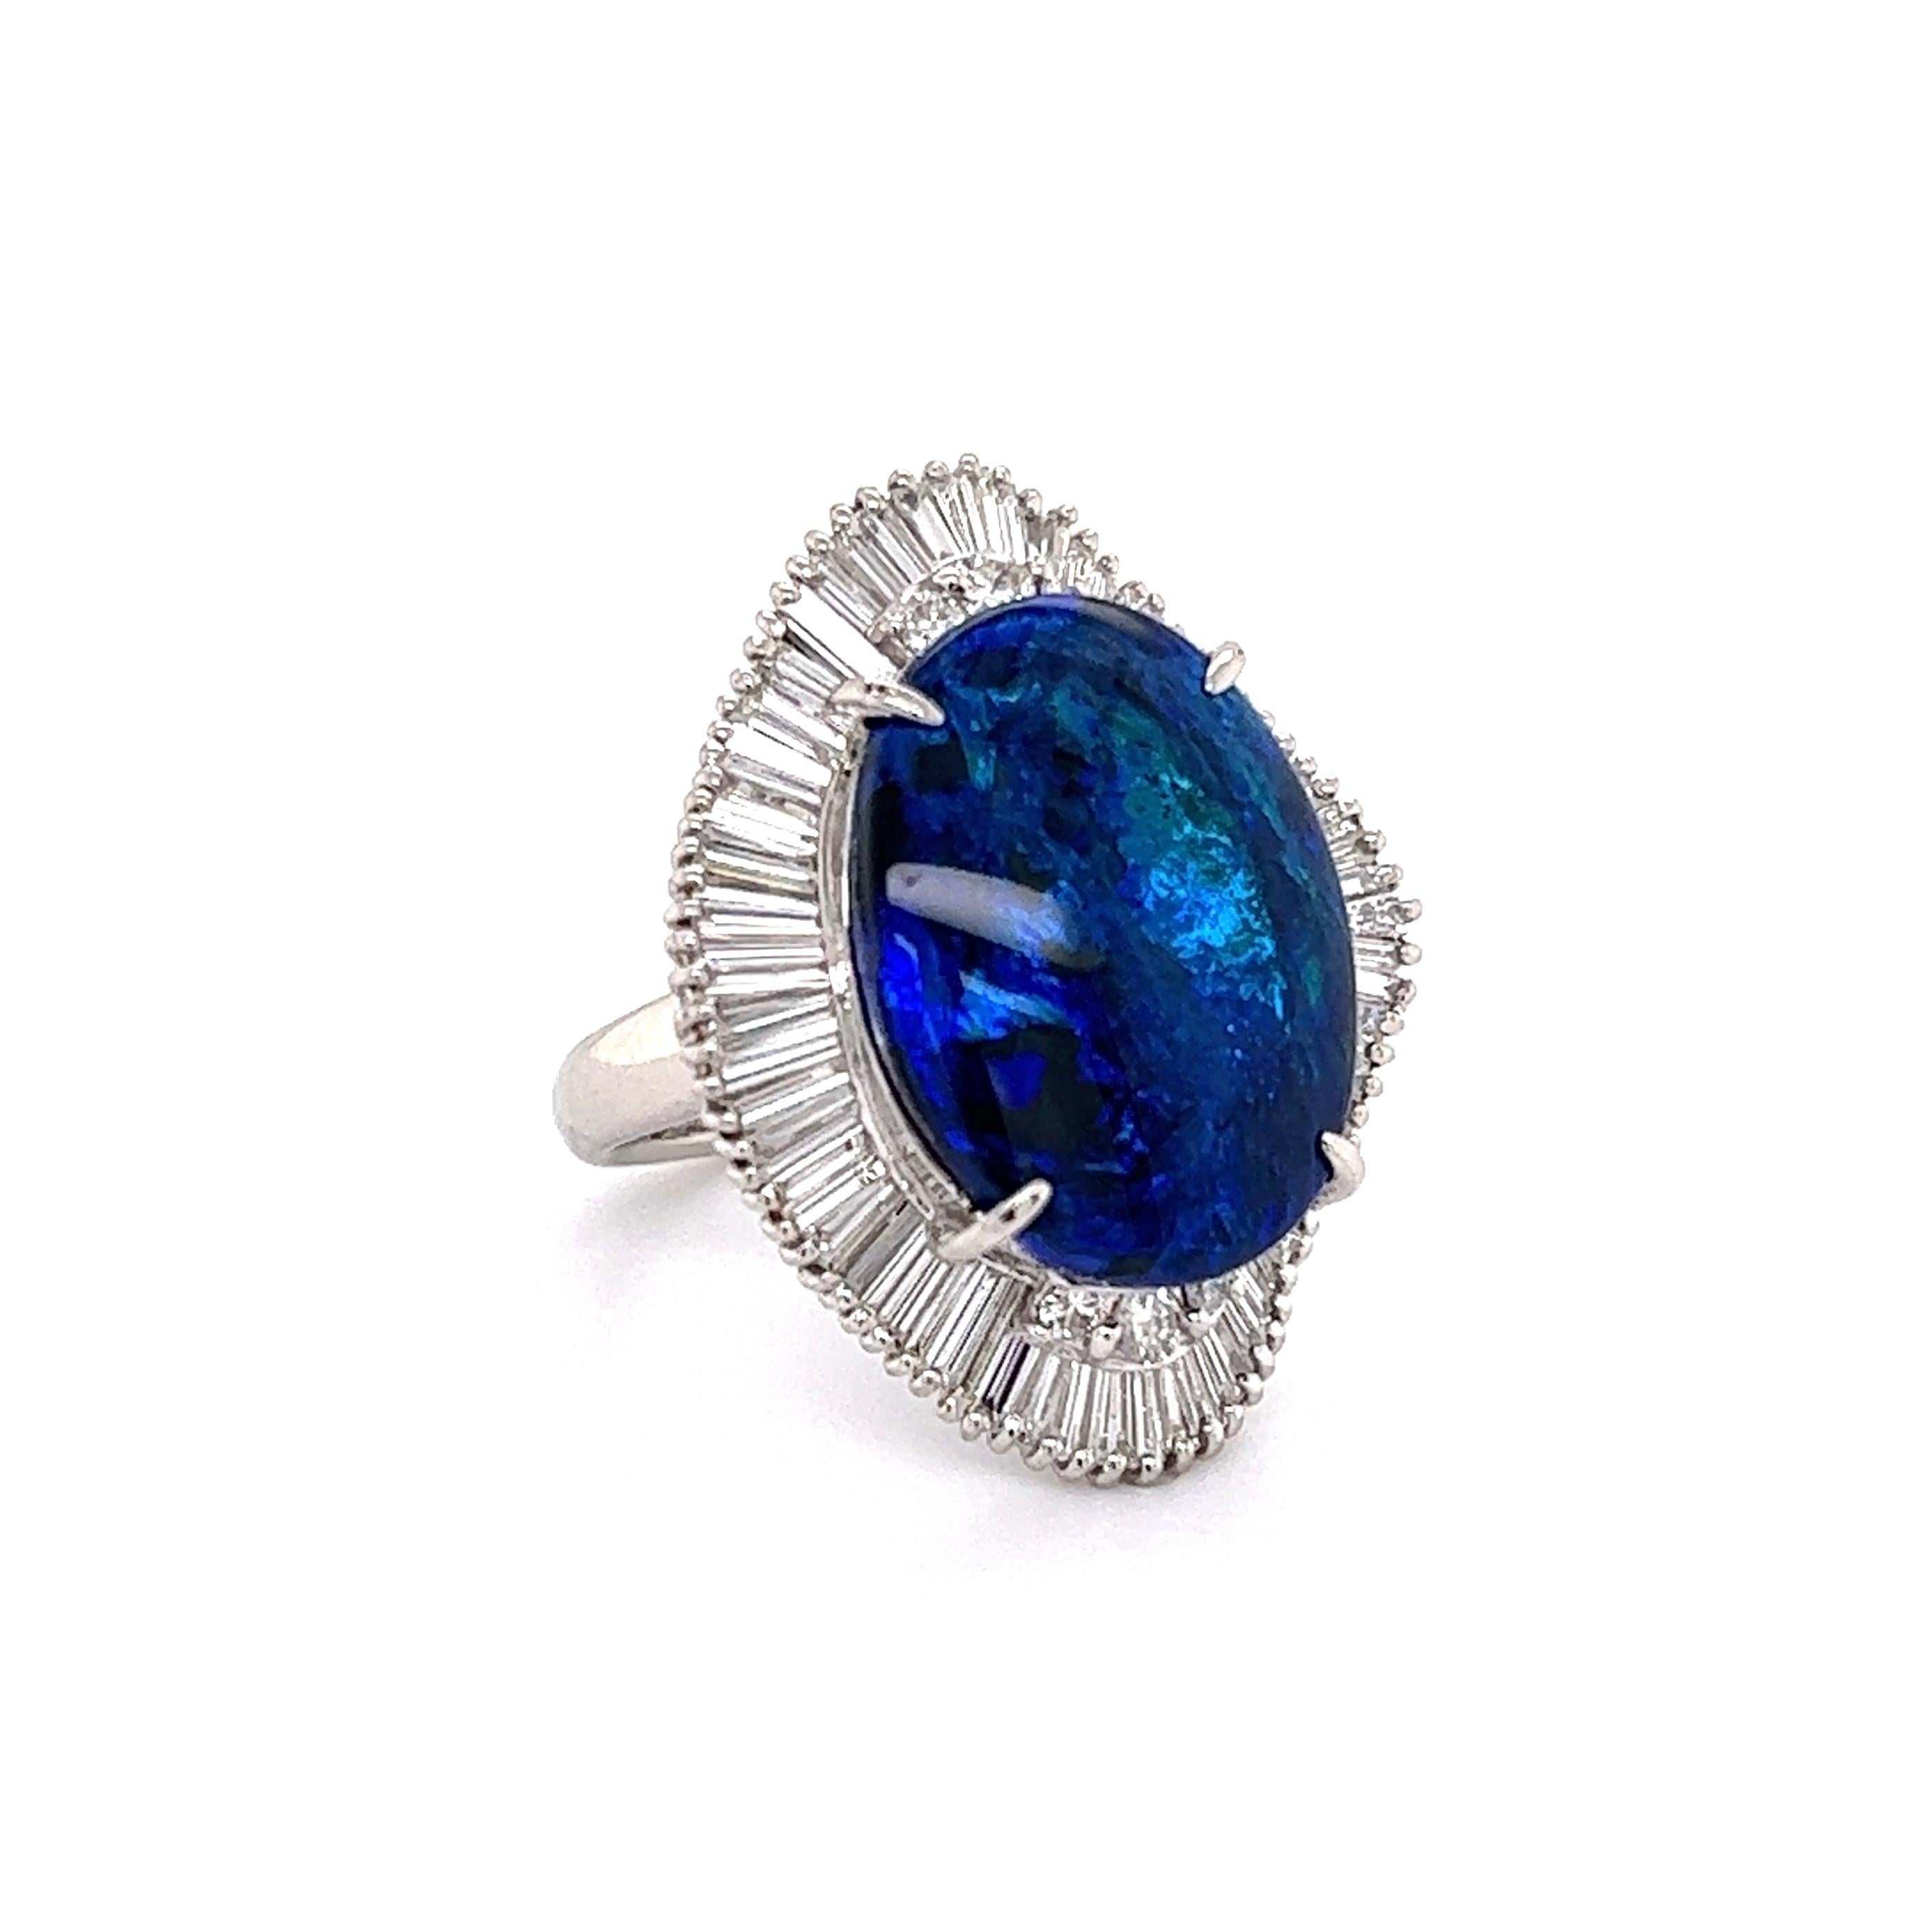 Simply Beautiful! Black Opal and Diamond Cocktail Ring. Centering by a 6.69 Carat Oval Black Opal, surrounded by Diamonds, weighing approx. 1.40tcw. Finely detailed Hand-crafted Platinum mounting. Approx. Dimensions: 1.01” l x 0.84” w x 1.08” h.